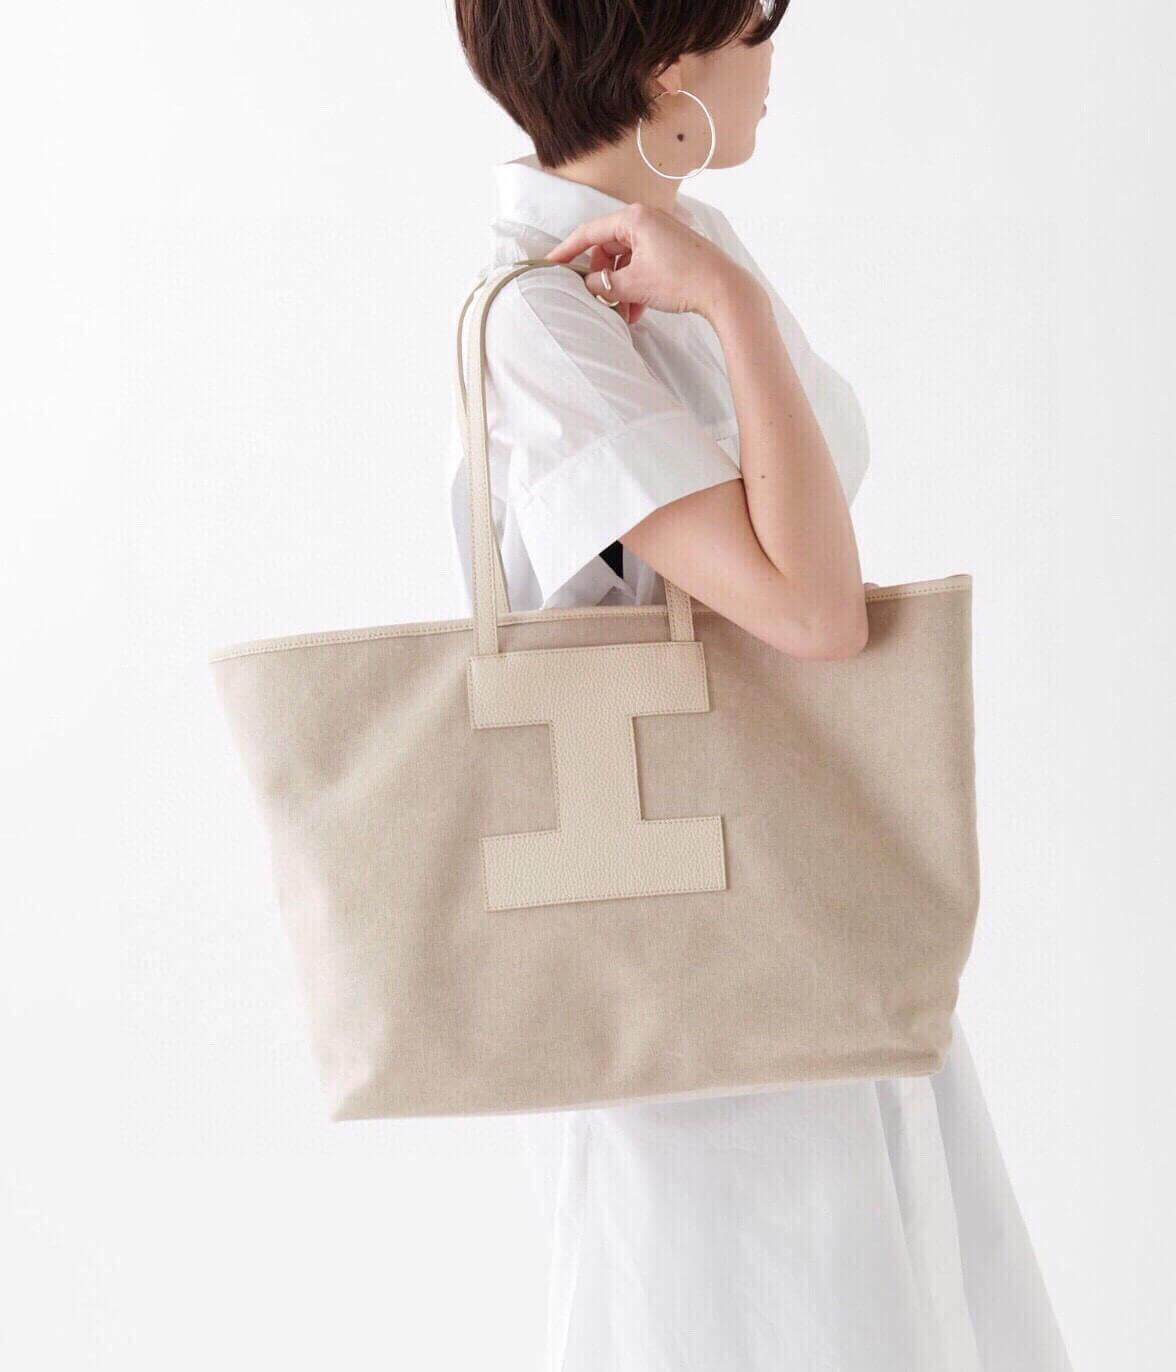 For papier ZA A4 Textured Leather Tote Bag Bag -  Singapore